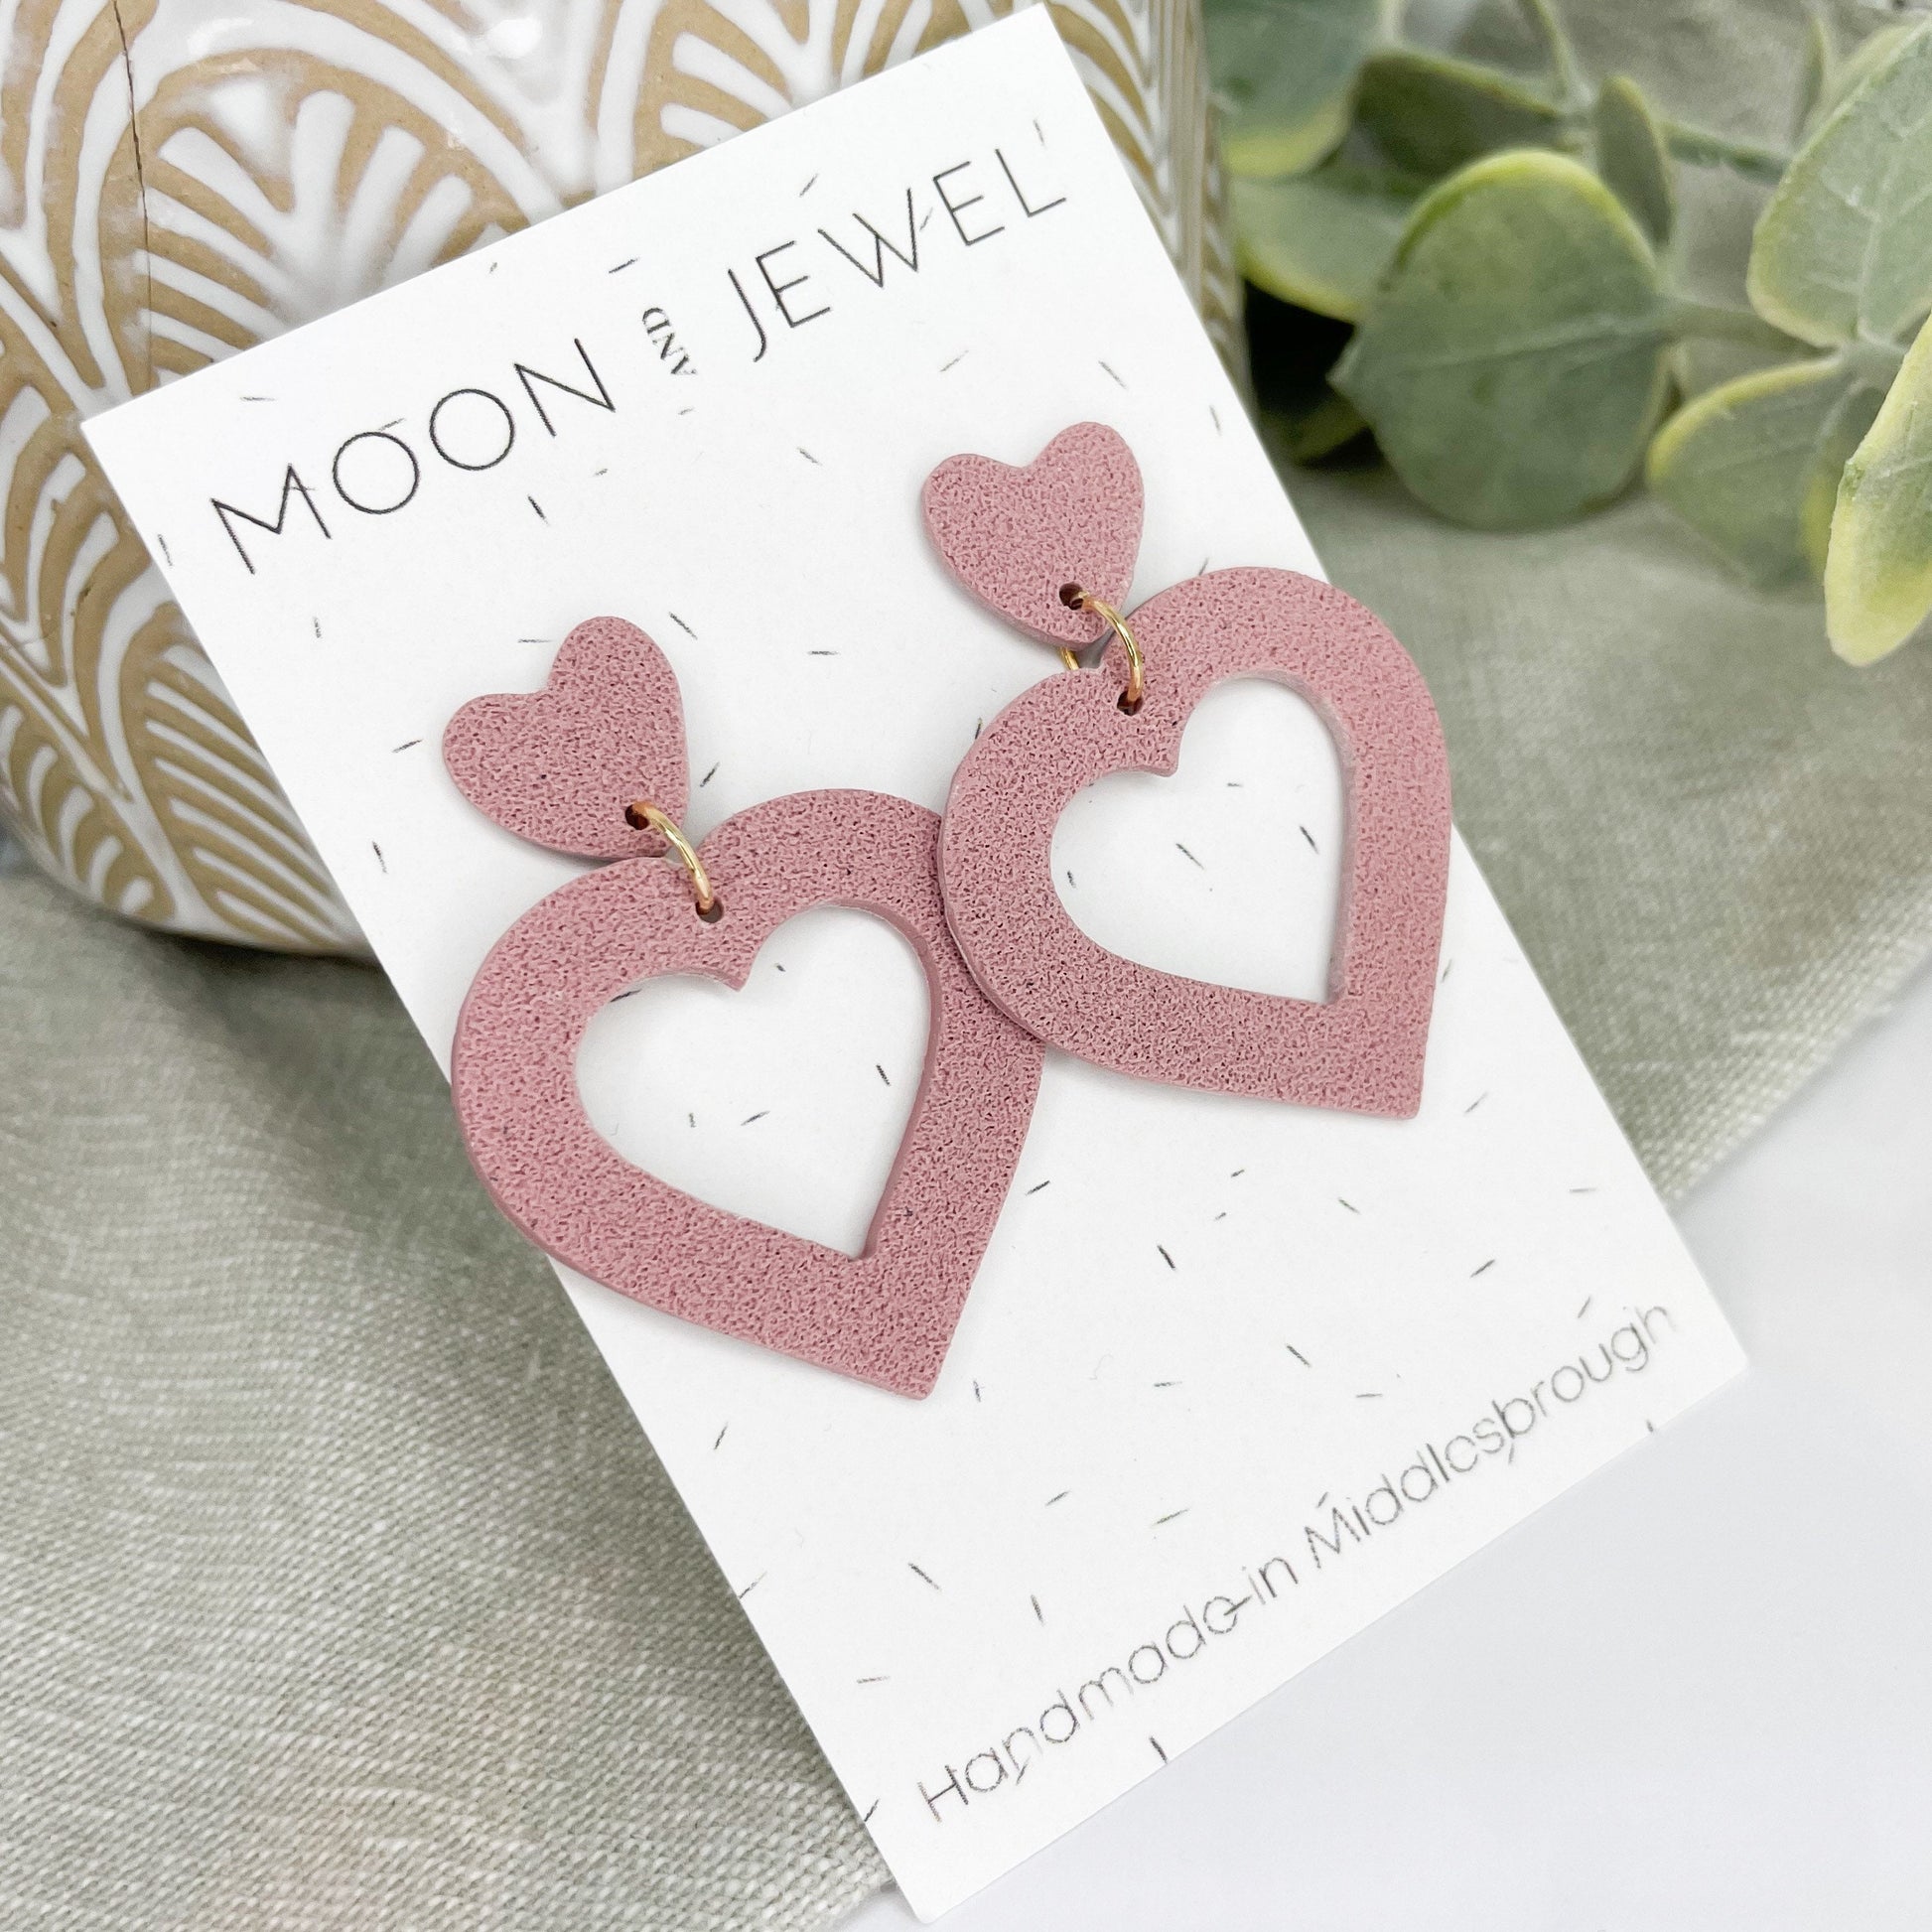 Pink heart polymer clay earrings, galentine gift, post box gift, best friend birthday gift, valentines girlfriend gift,